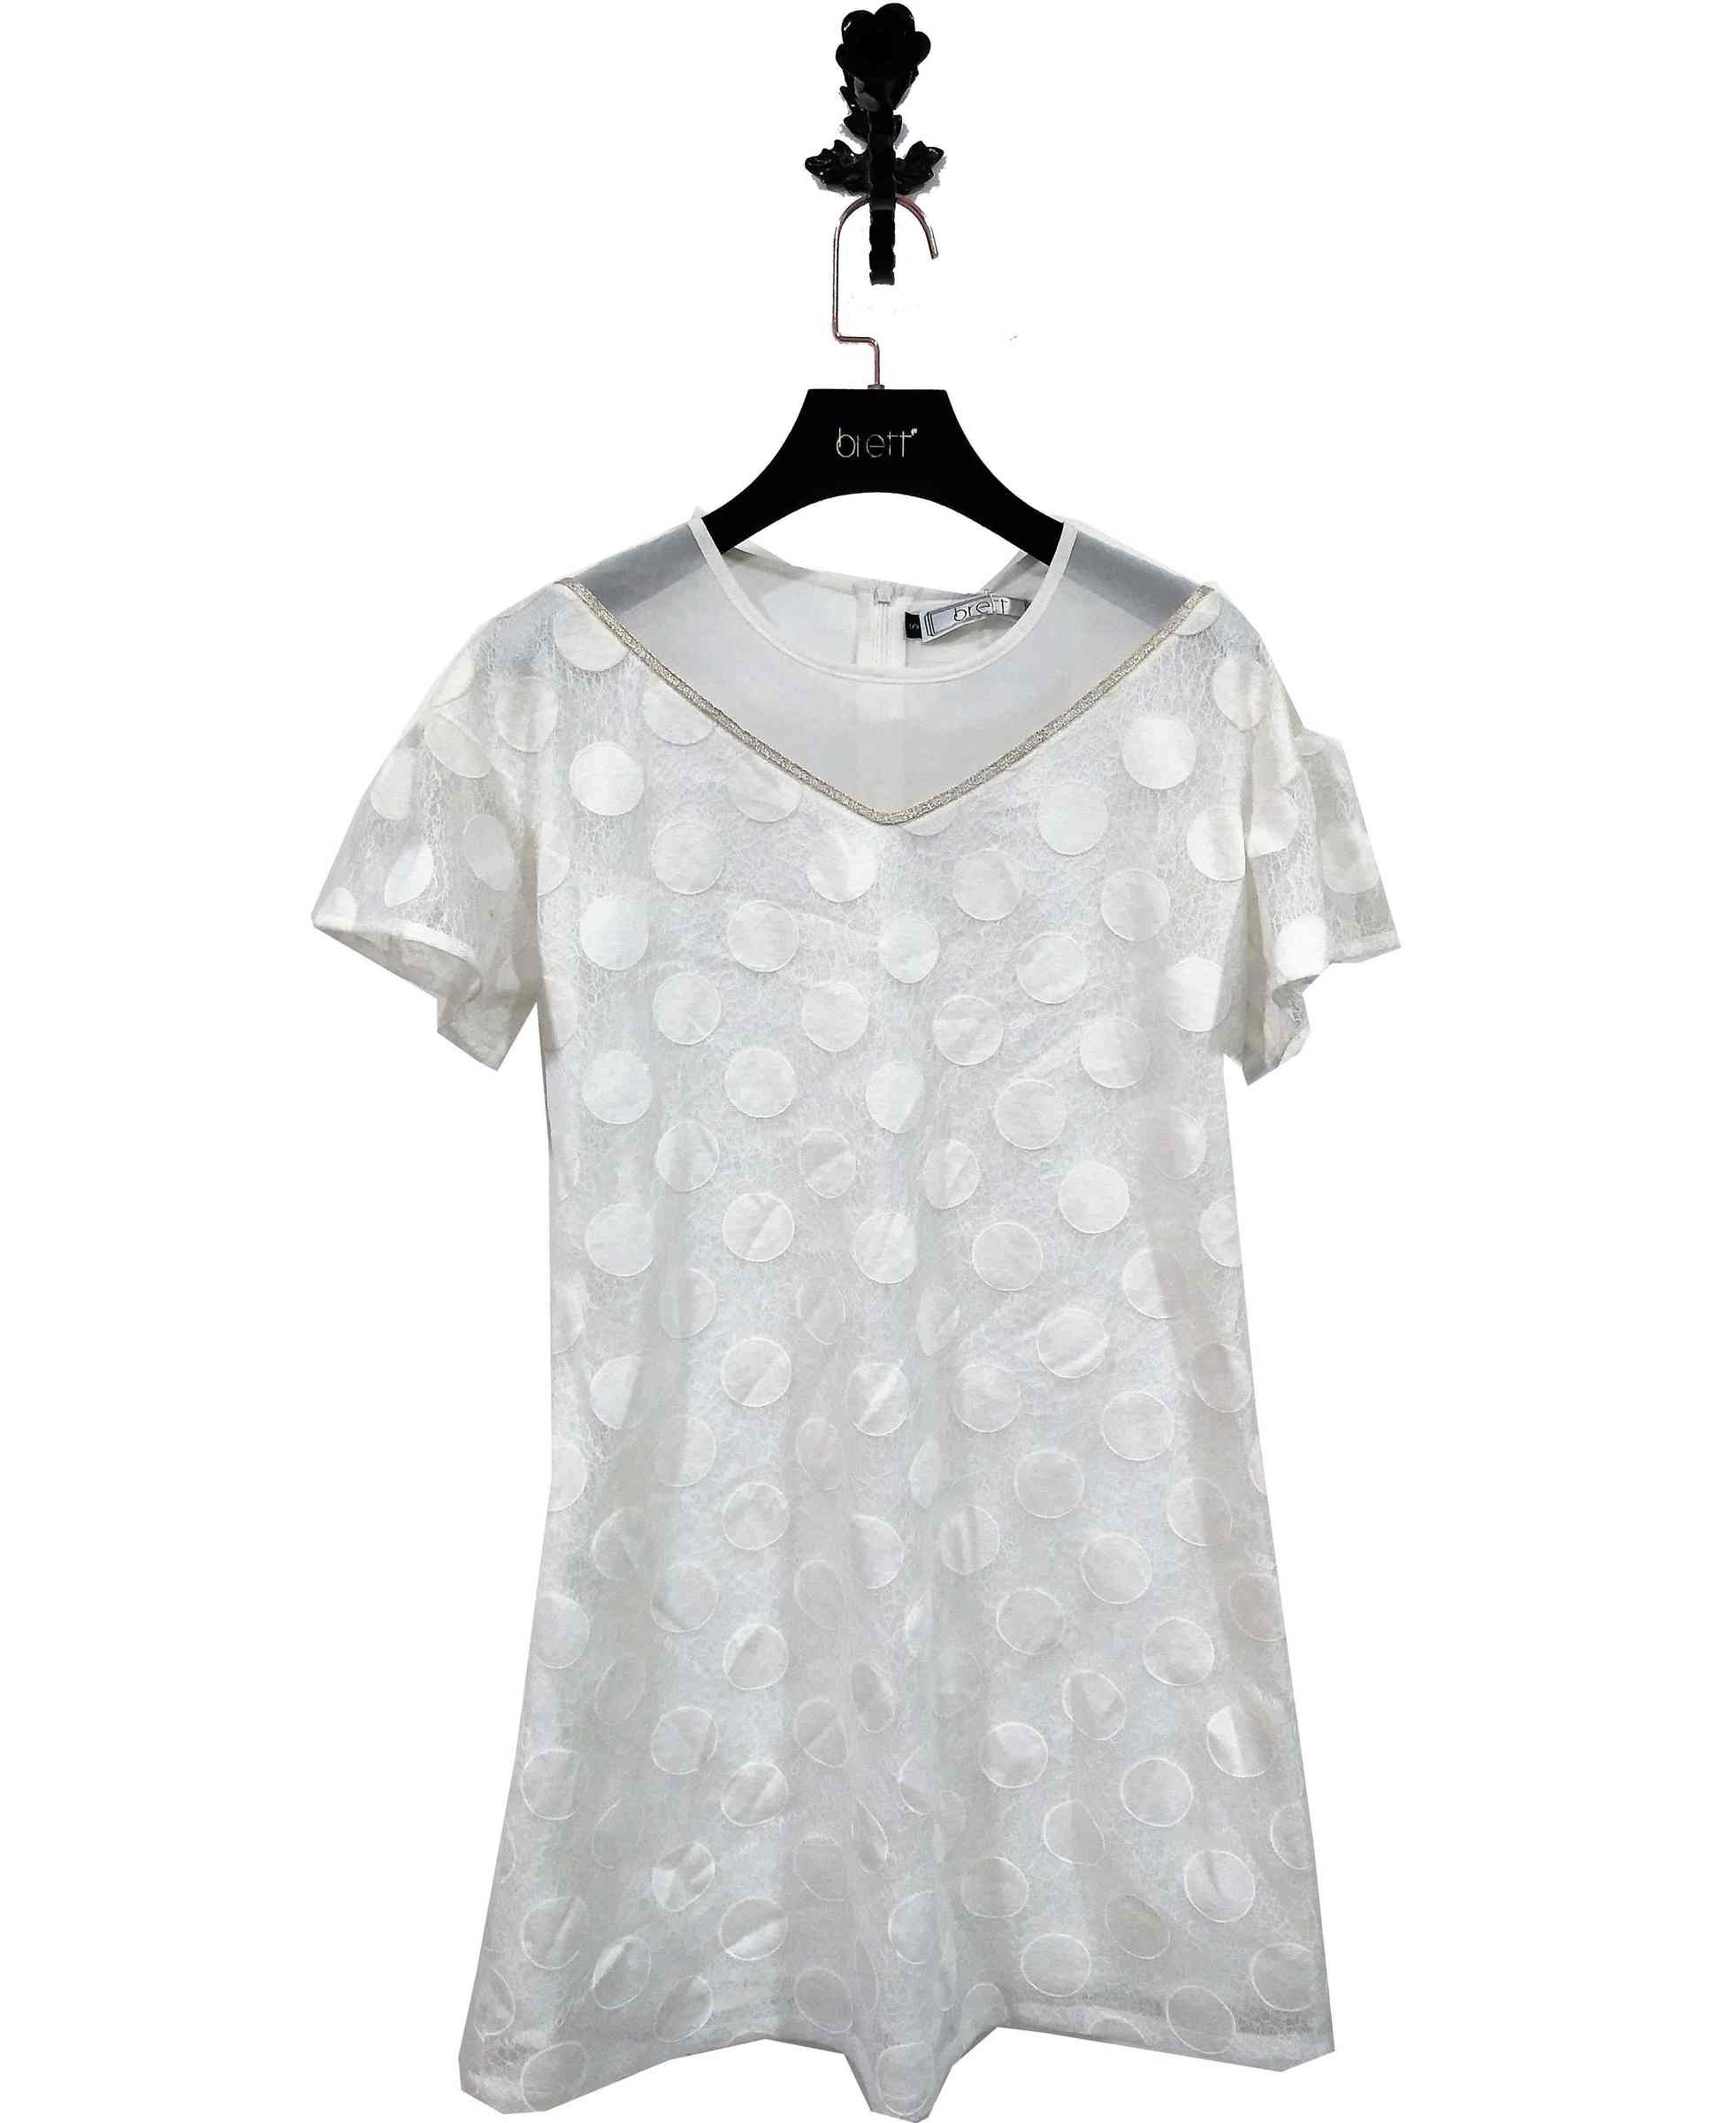 White embroidered dress latest design for white lace dress with white dresses for women (8).jpg